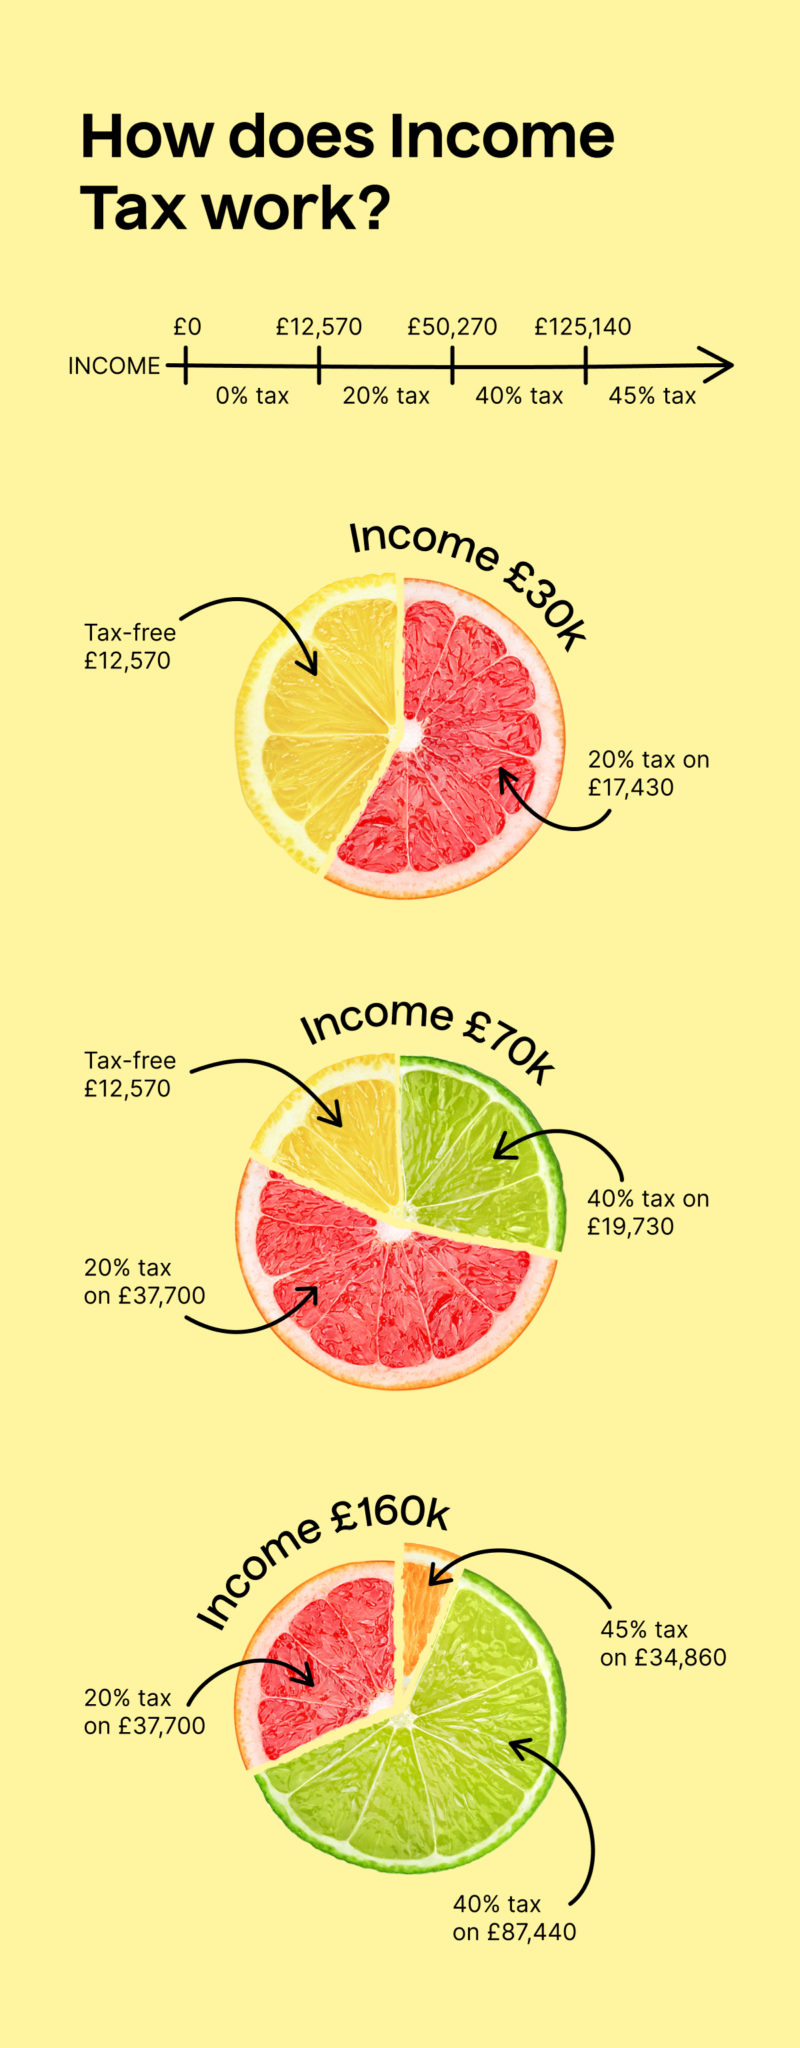 income-tax-rates-in-the-uk-taxscouts